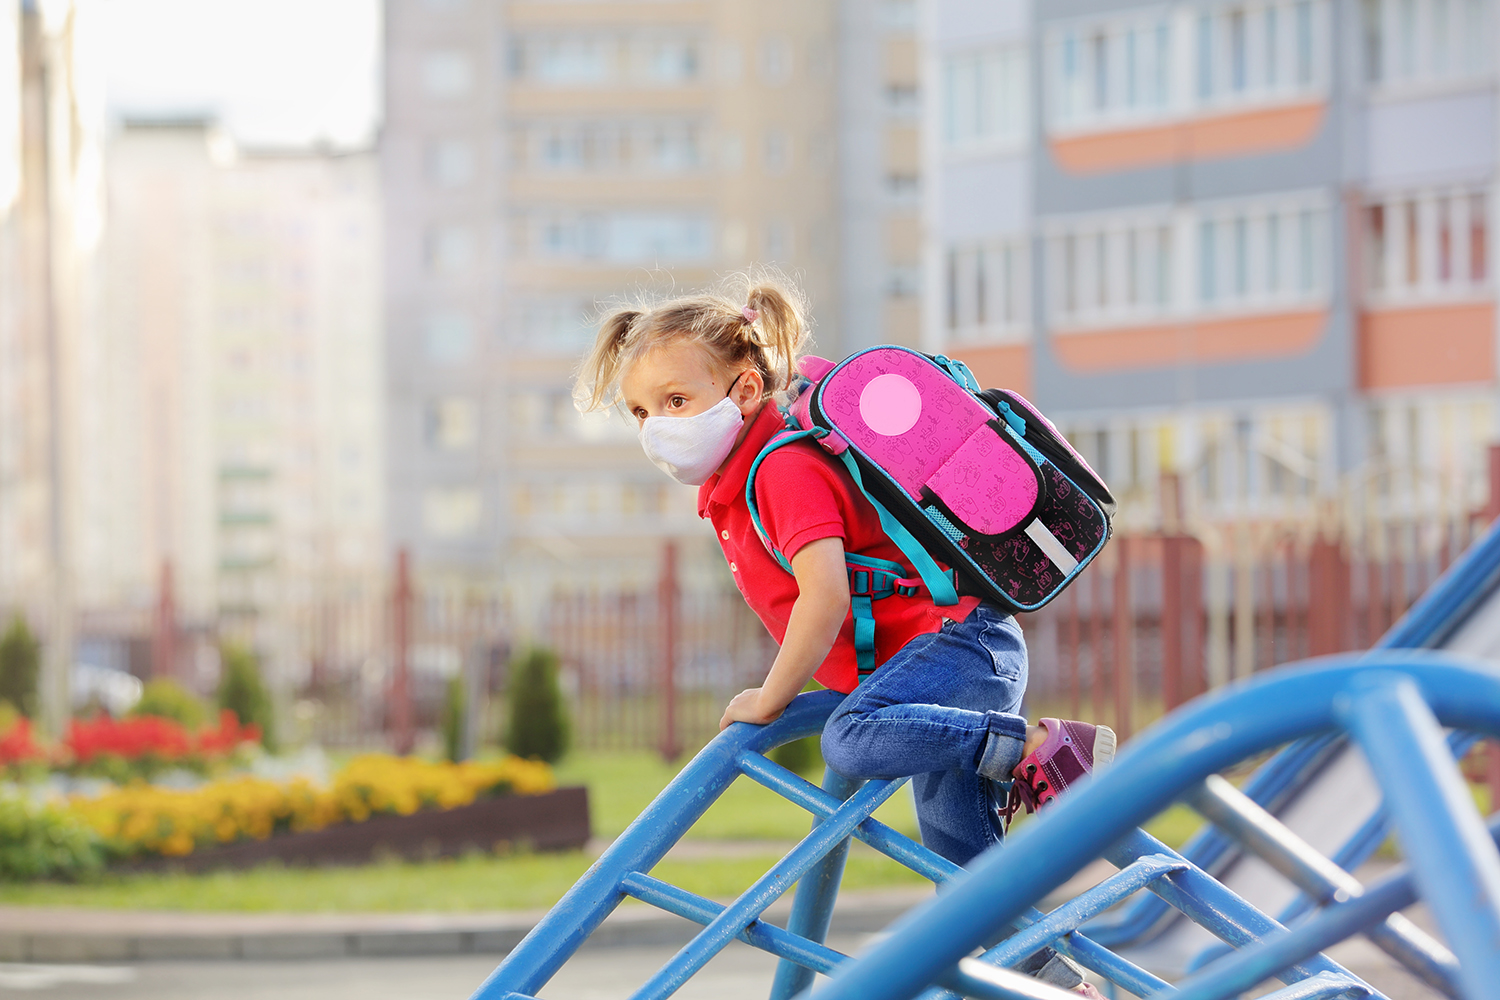 A young girl wearing a face mask and a backpack climb on playground equipment. Hazy skies appear in the background.